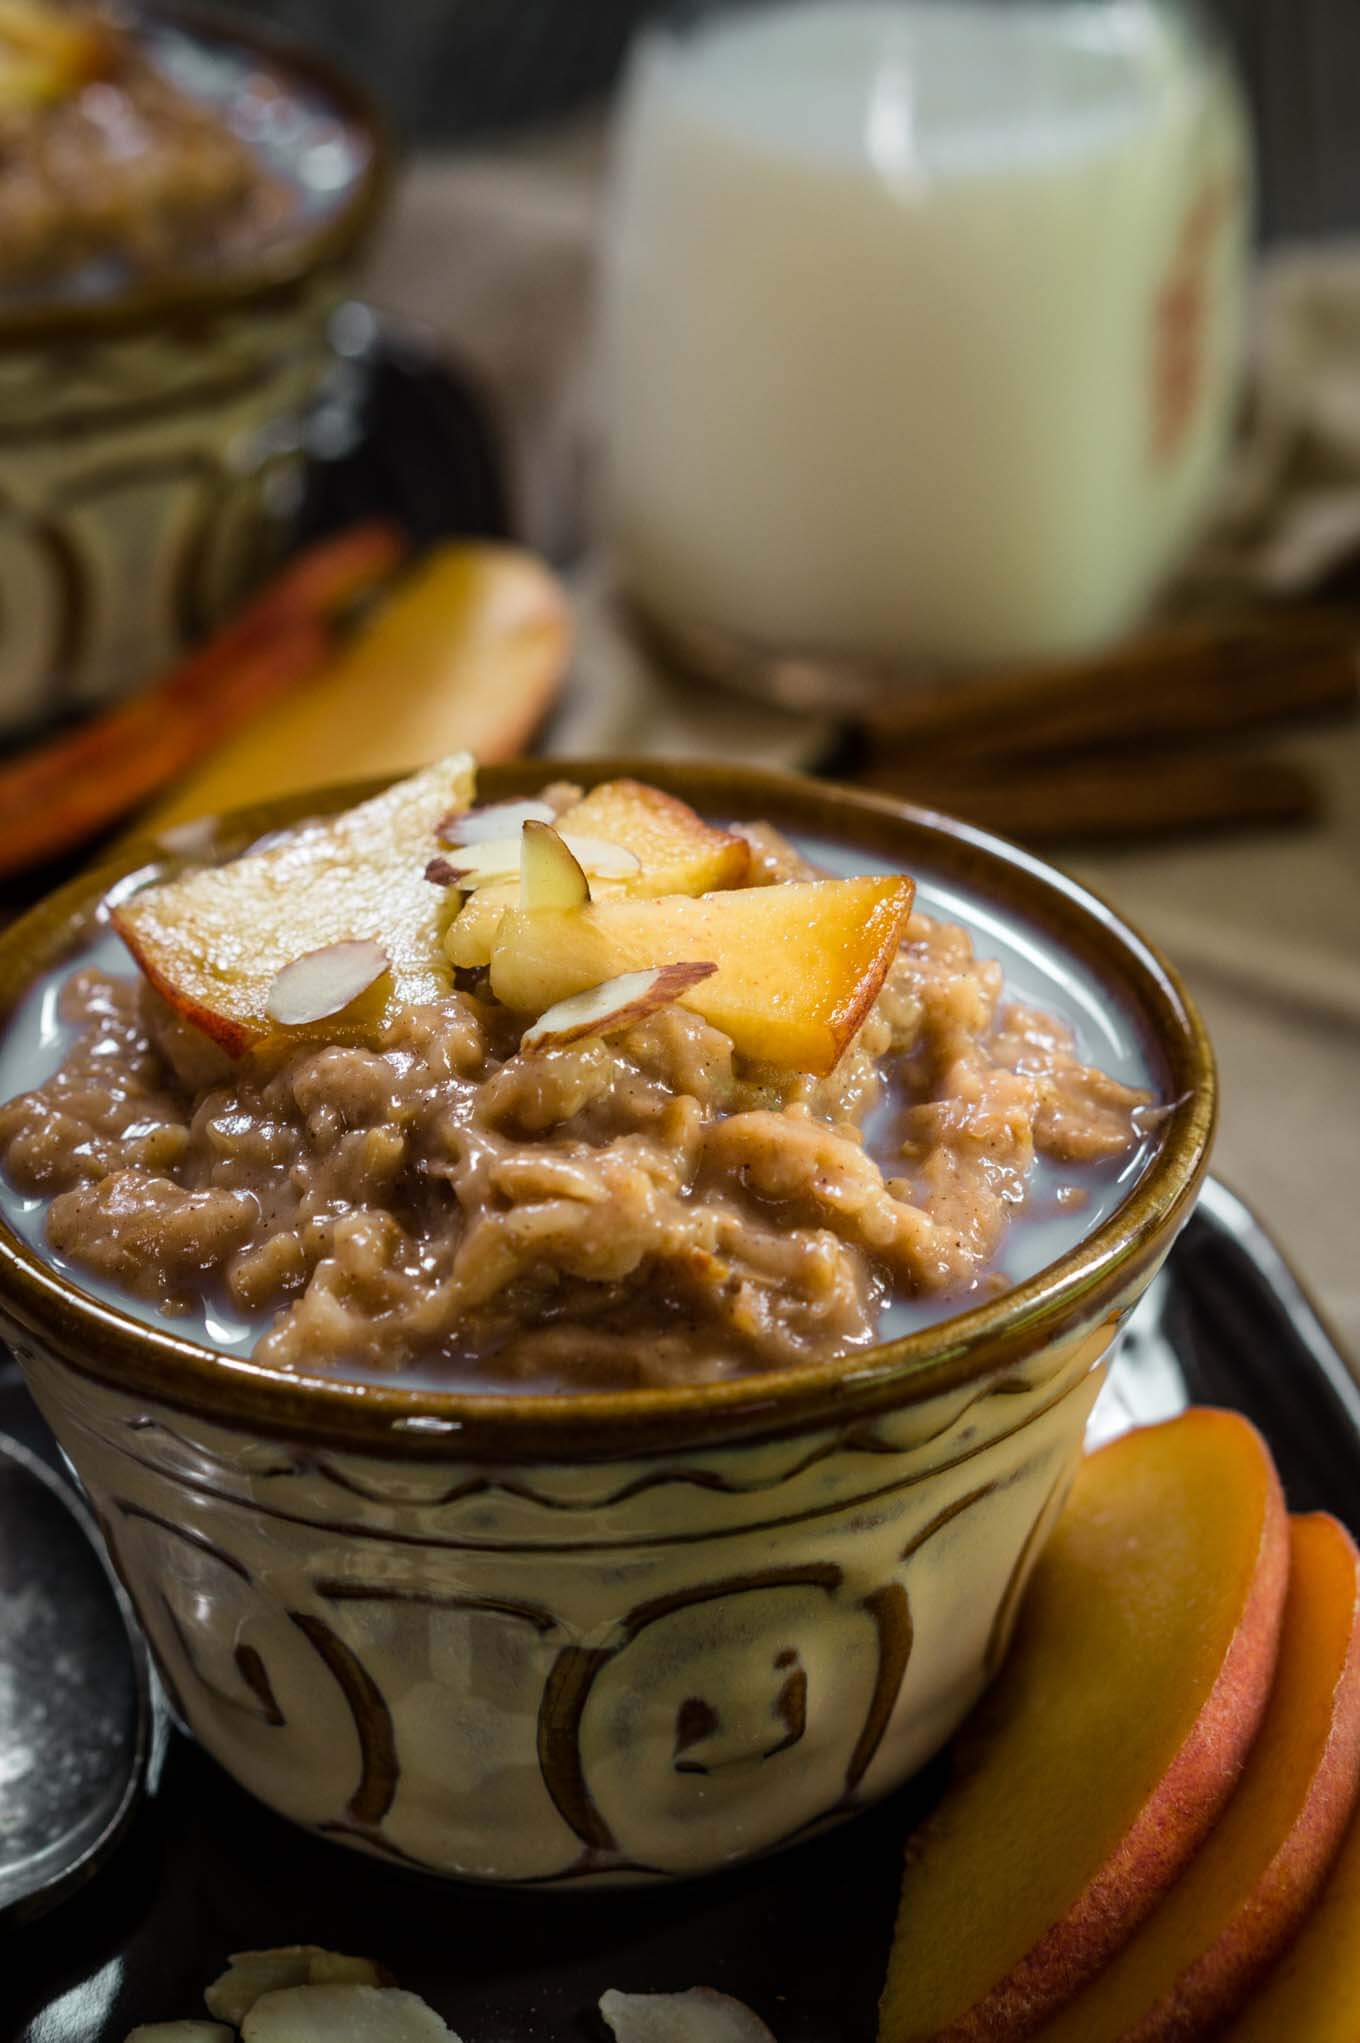 A yellow dish filled with Steel-cut Oats and Bulgar that\'s topped with warm milk, cinnamon, fresh peaches, and nuts. Fresh sliced peaches sit to the side. A jar of milk and a second dish sits in the background.